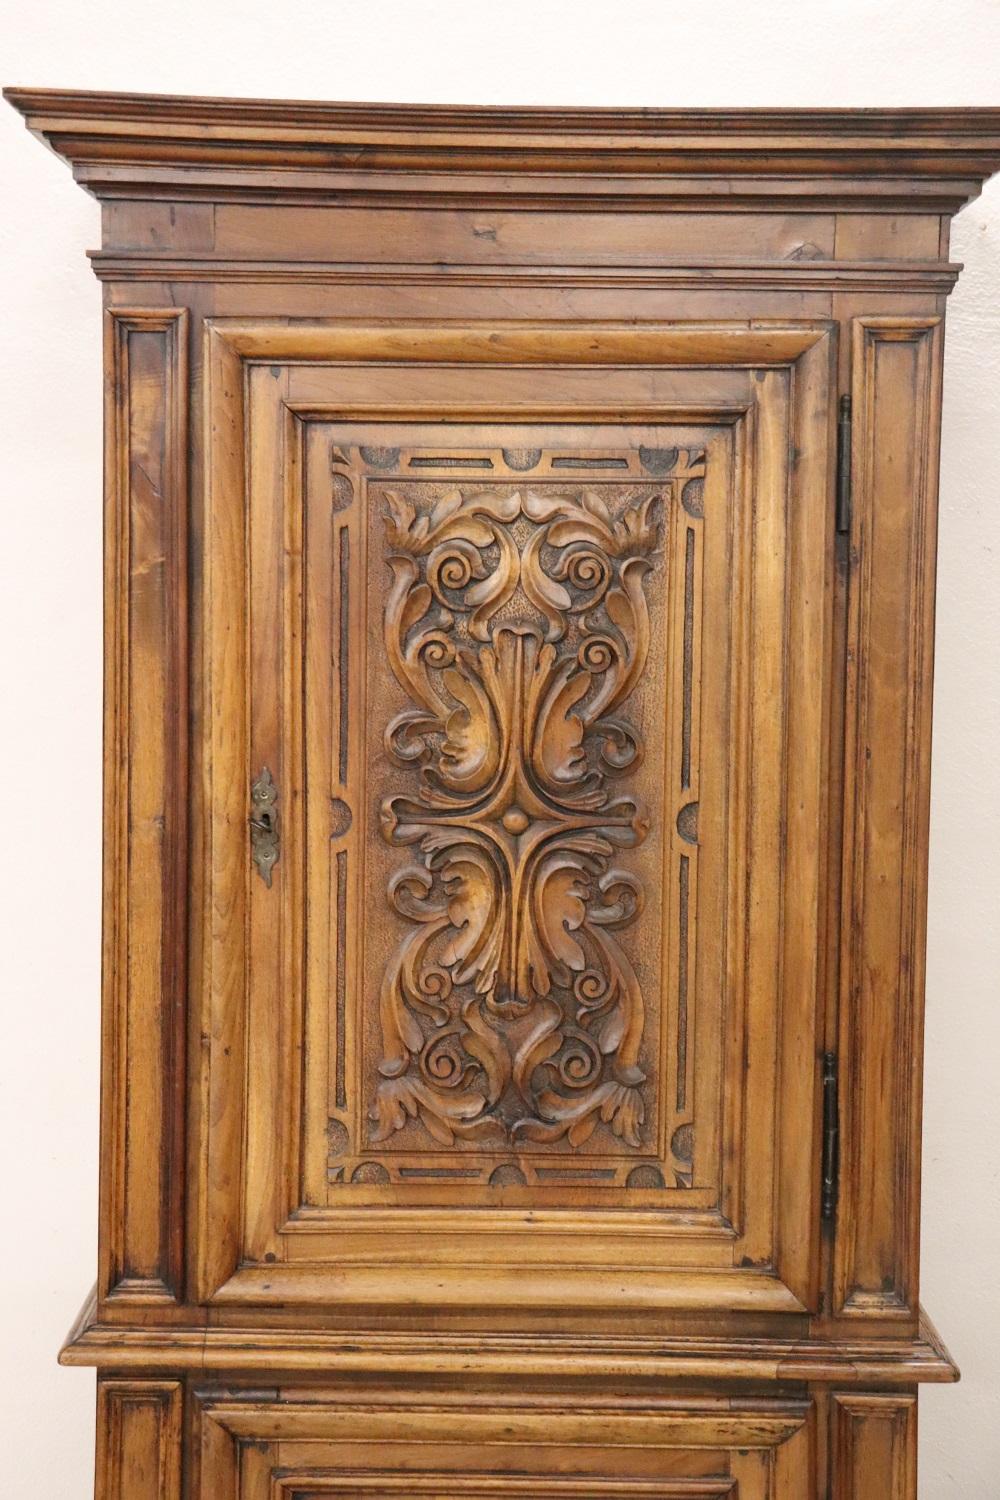 Hand-Carved 19th Century Italian Antique Small Cabinet in Solid Carved Walnut